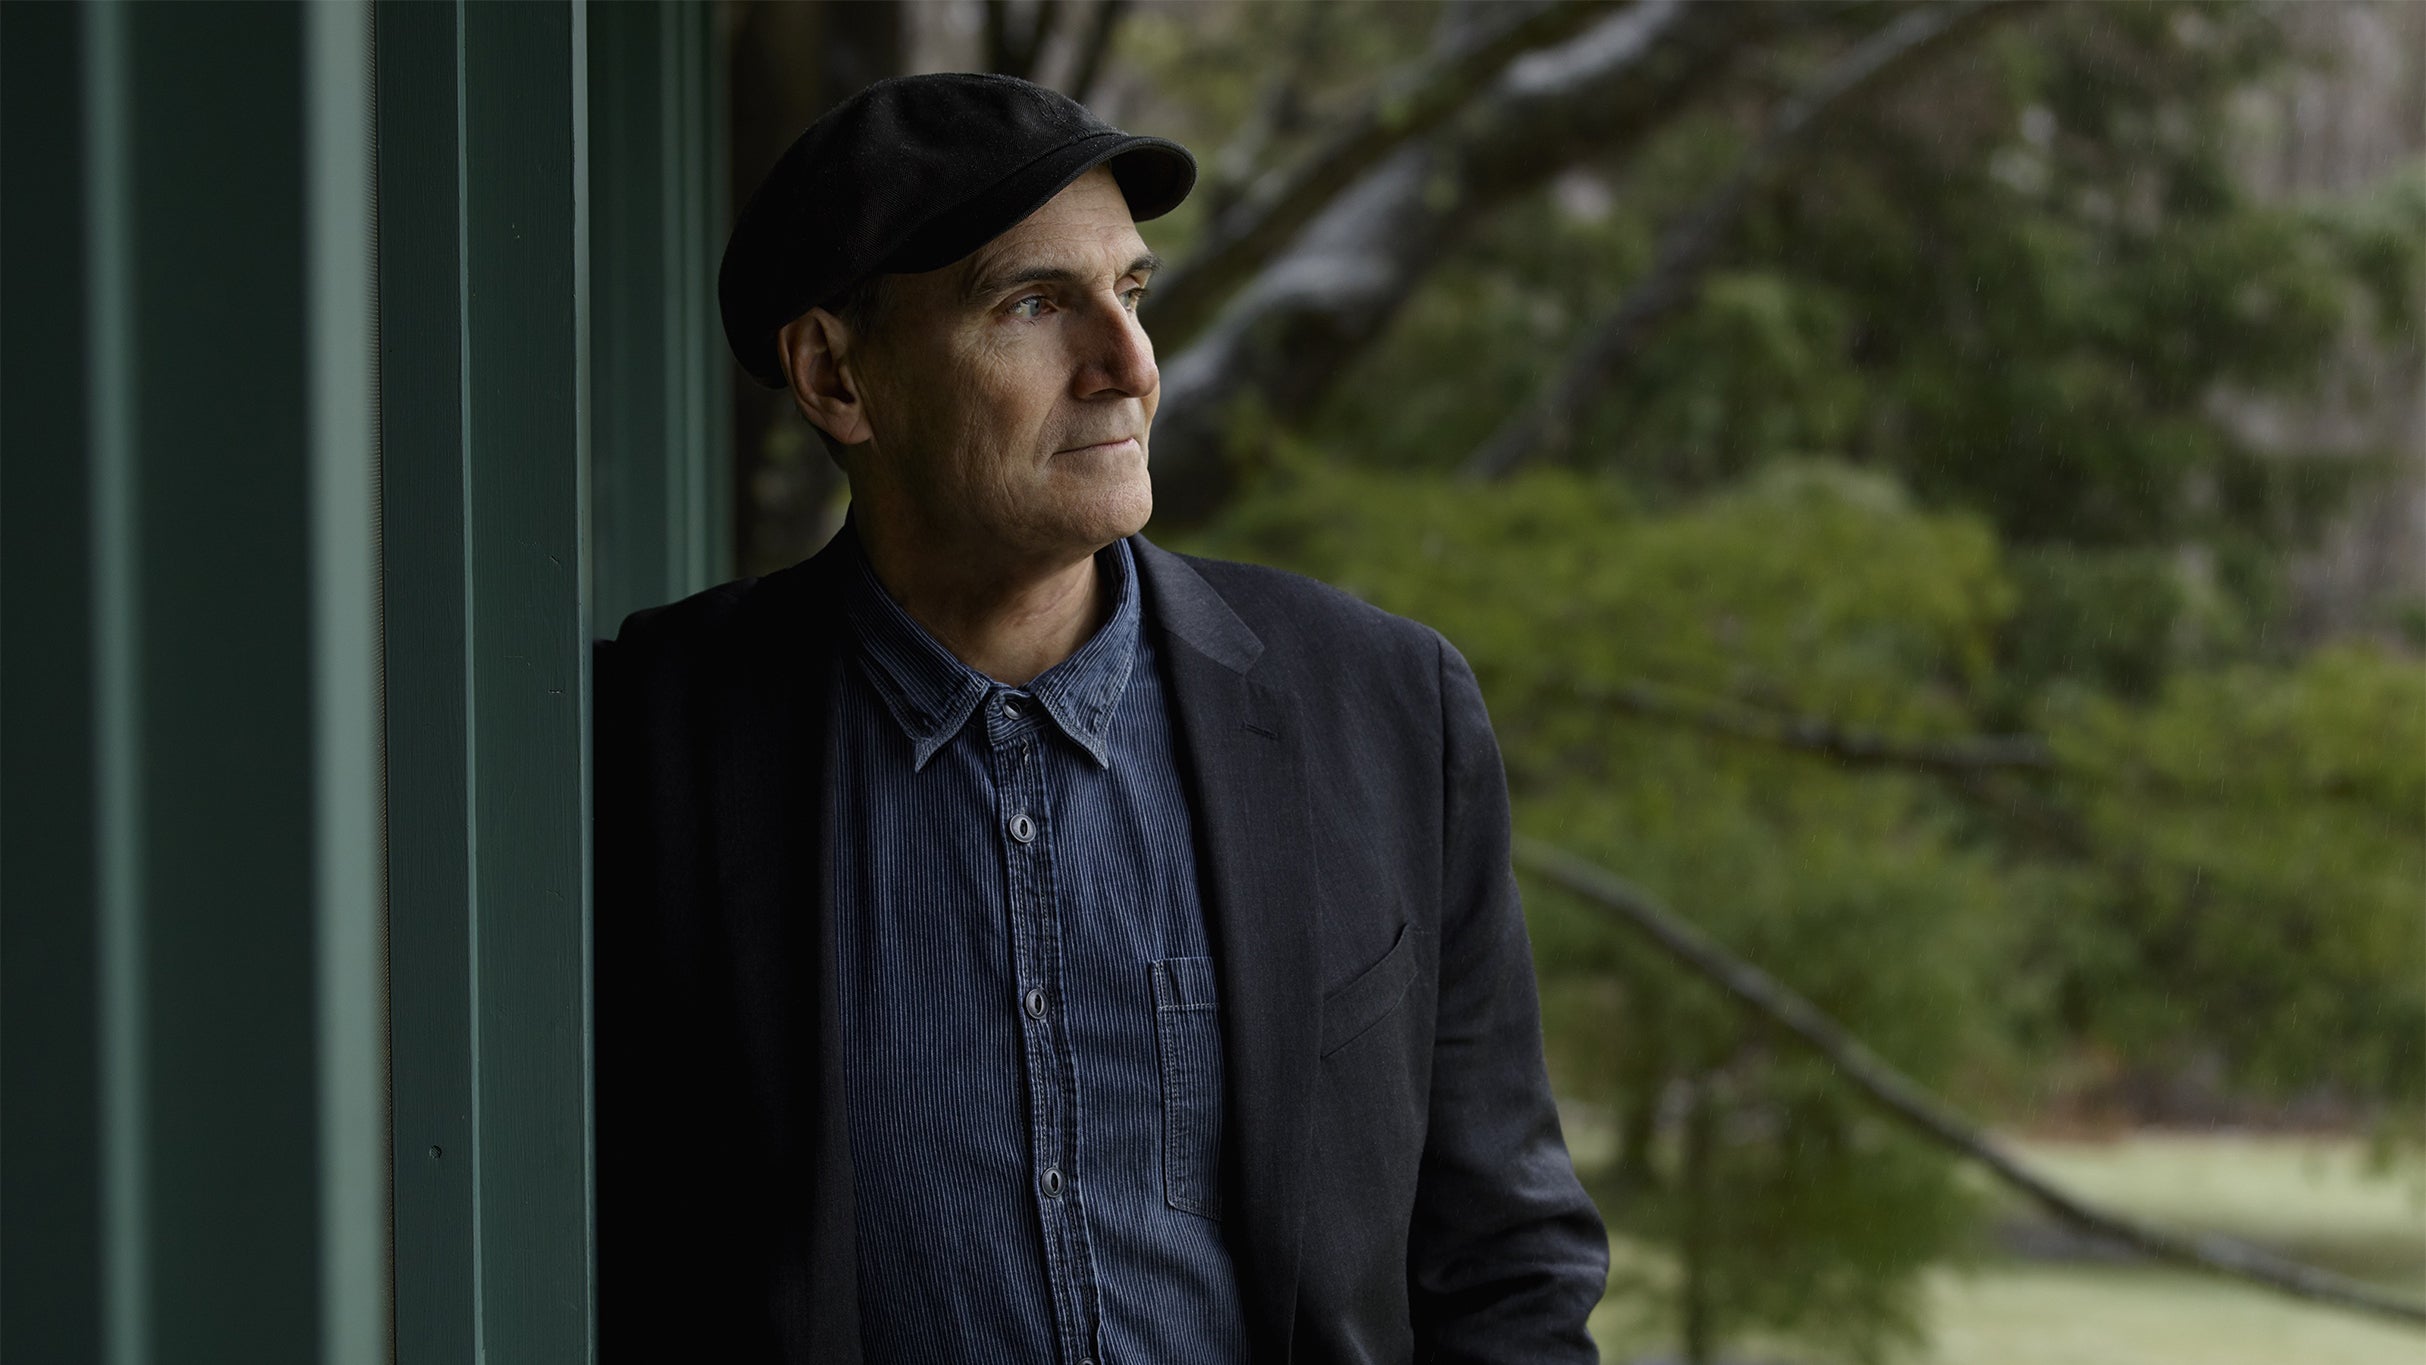 An Evening with James Taylor free pre-sale pa55w0rd